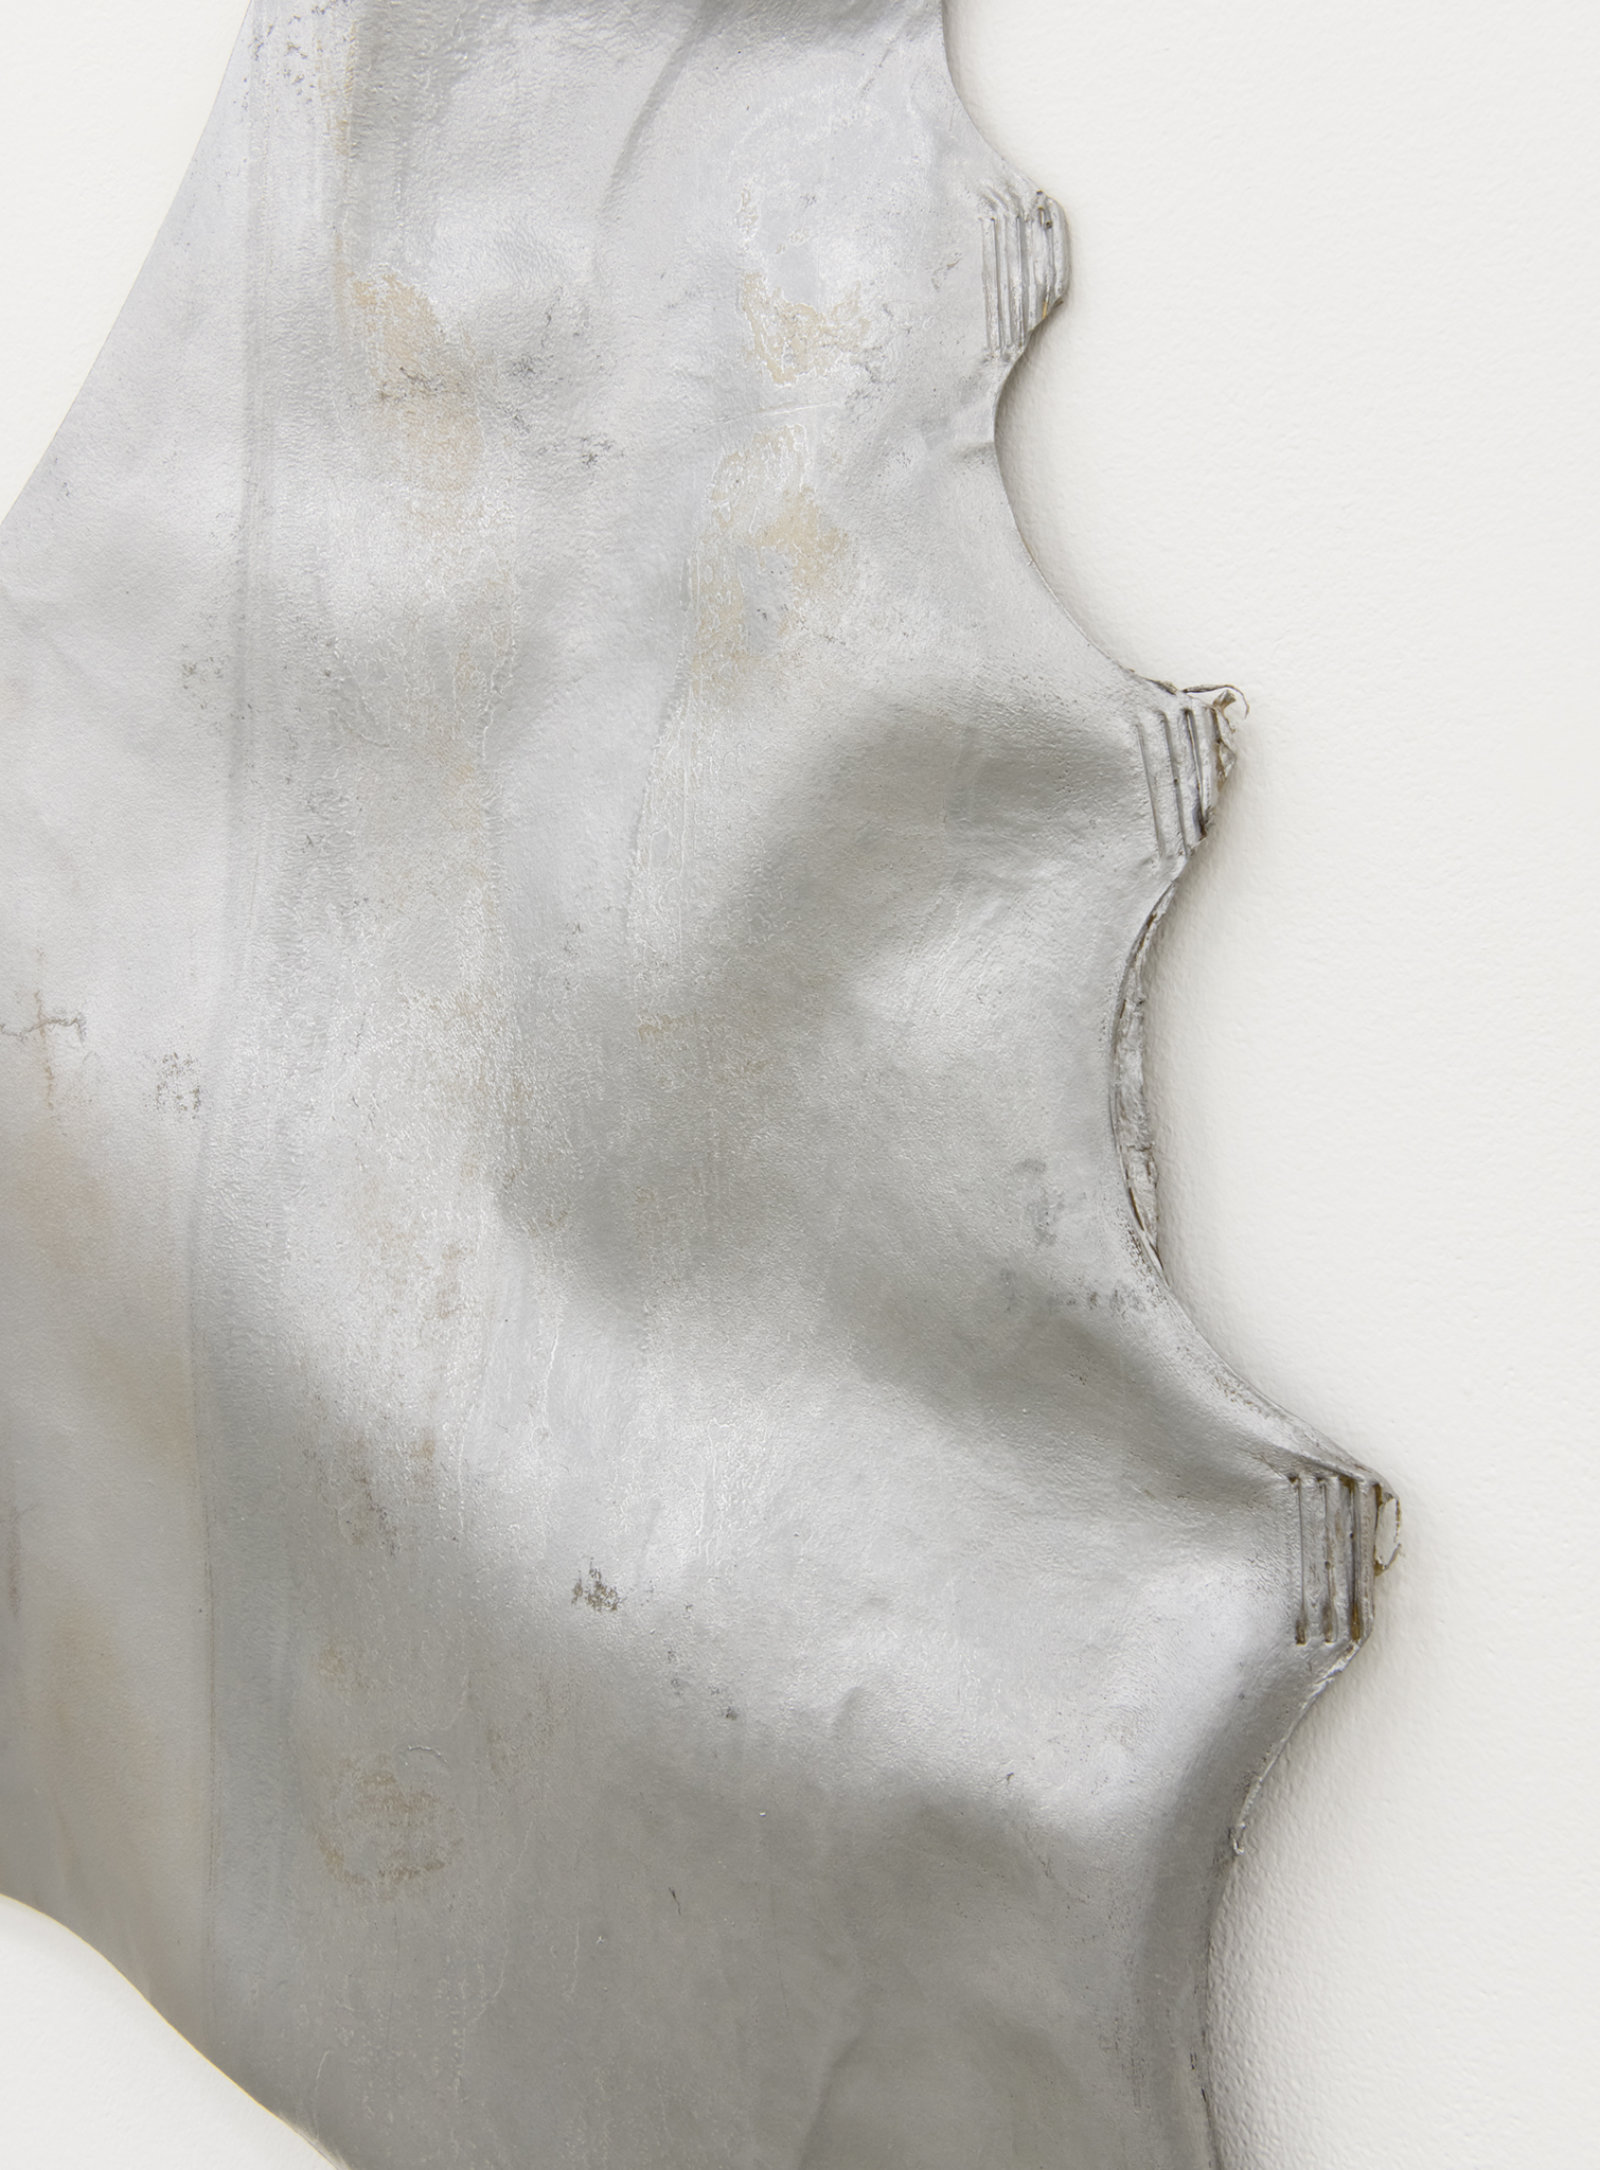 Brian Jungen, Untitled (detail), 2010, elk hide and silver ink, 106 x 53 x 4 in. (269 x 135 x 10 cm)